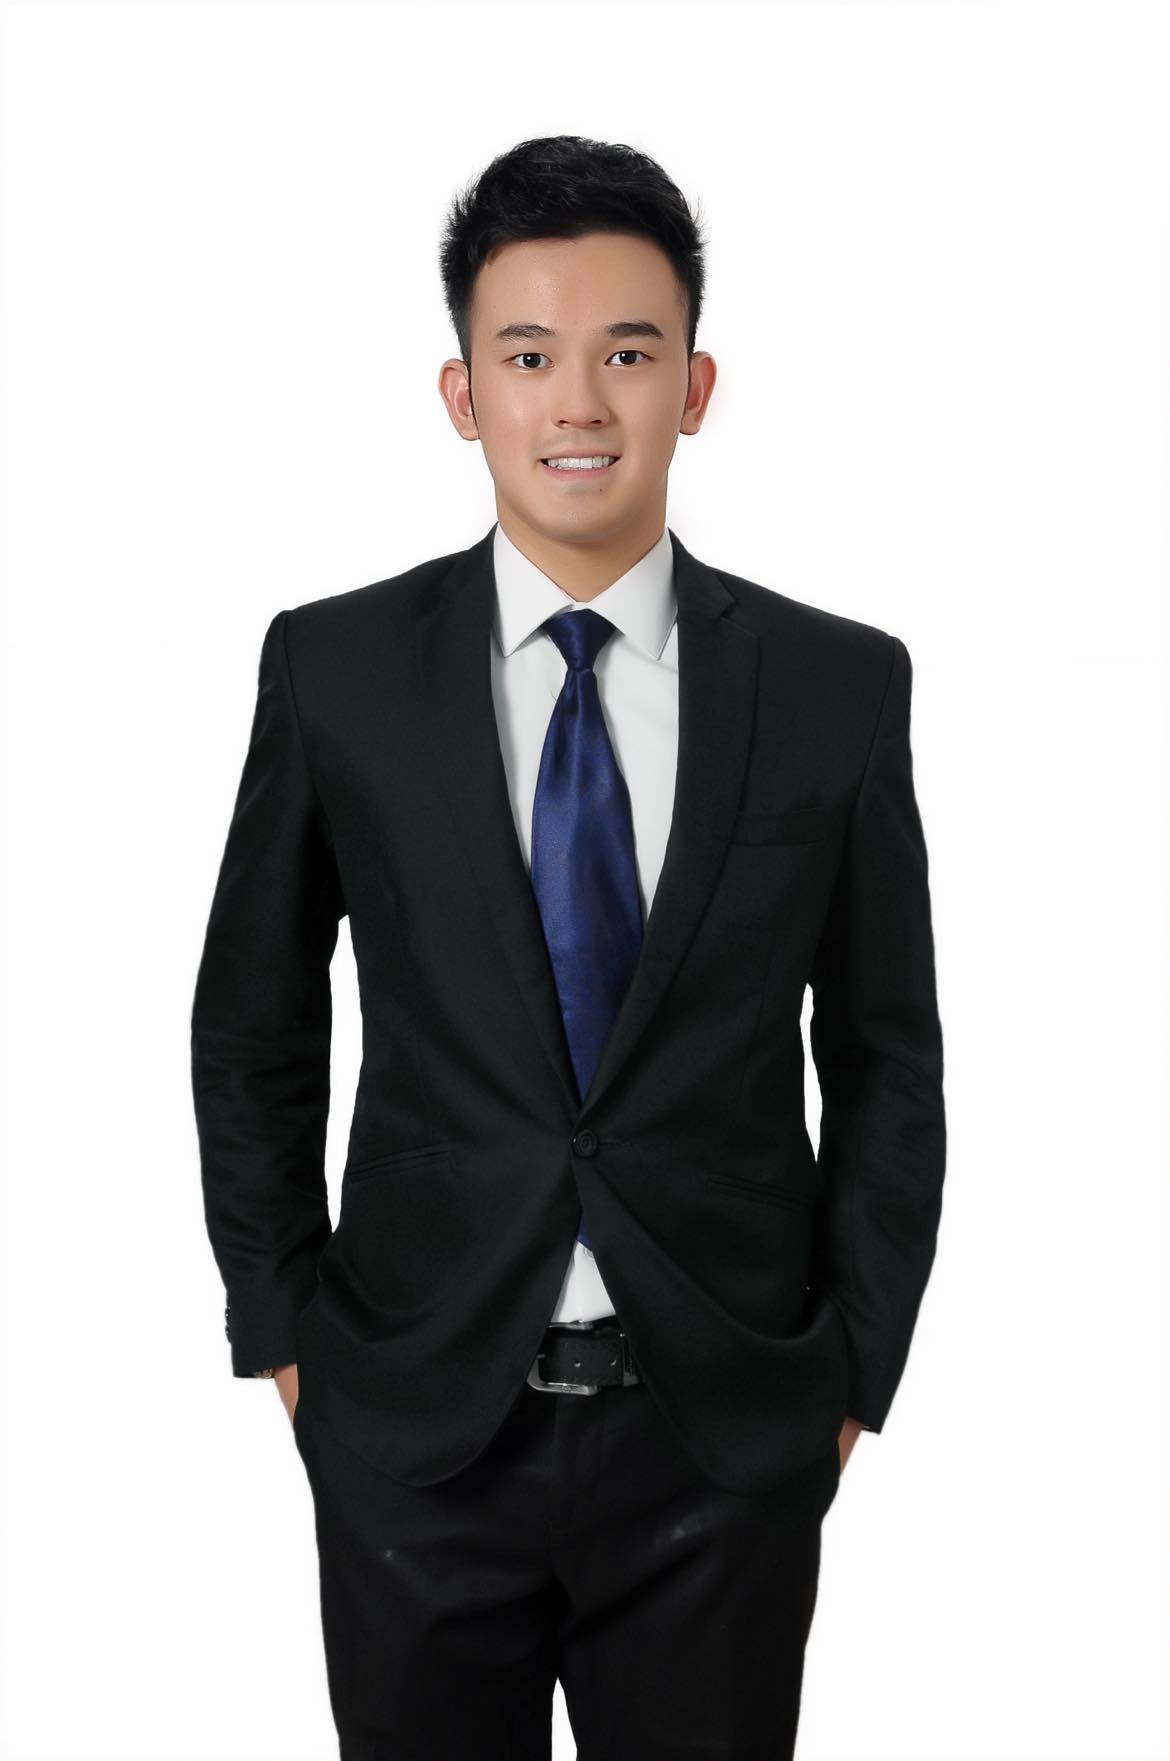 Master of Professional Accounting student Lewis Ooi. (Picture: Lewis Ooi)